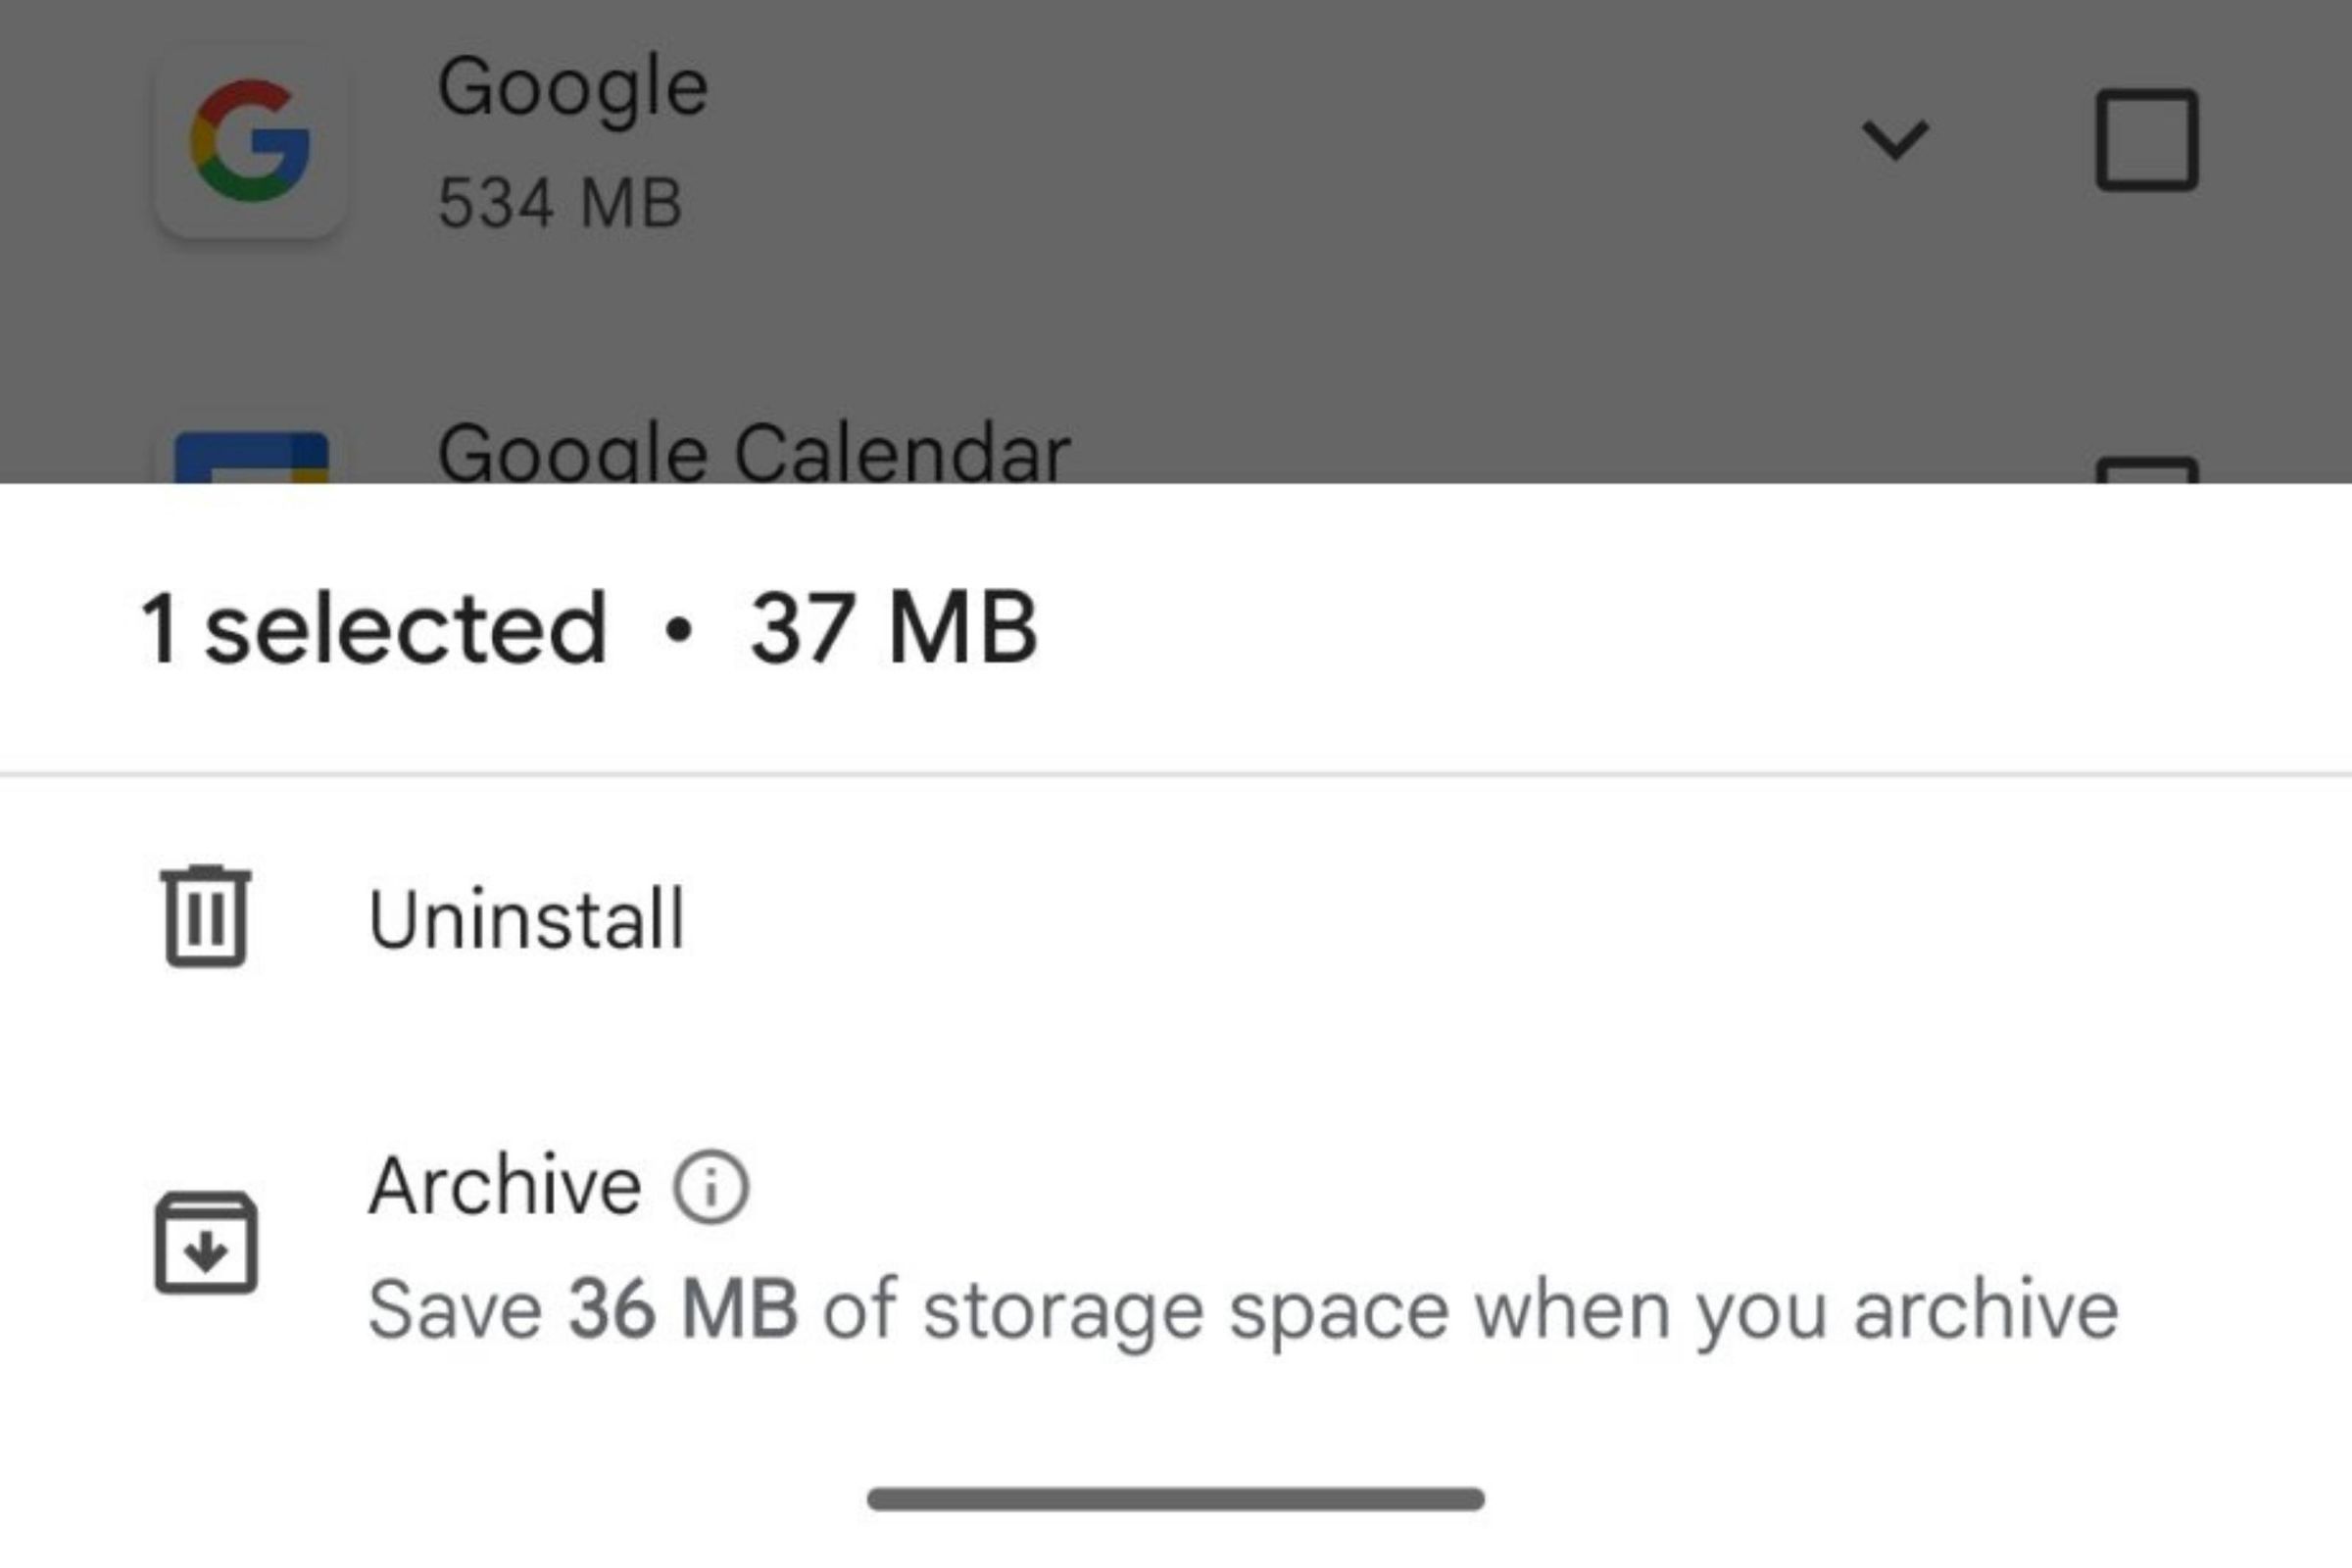 The feature should display how much storage space you can save by archiving an application instead of having to completely uninstall it.